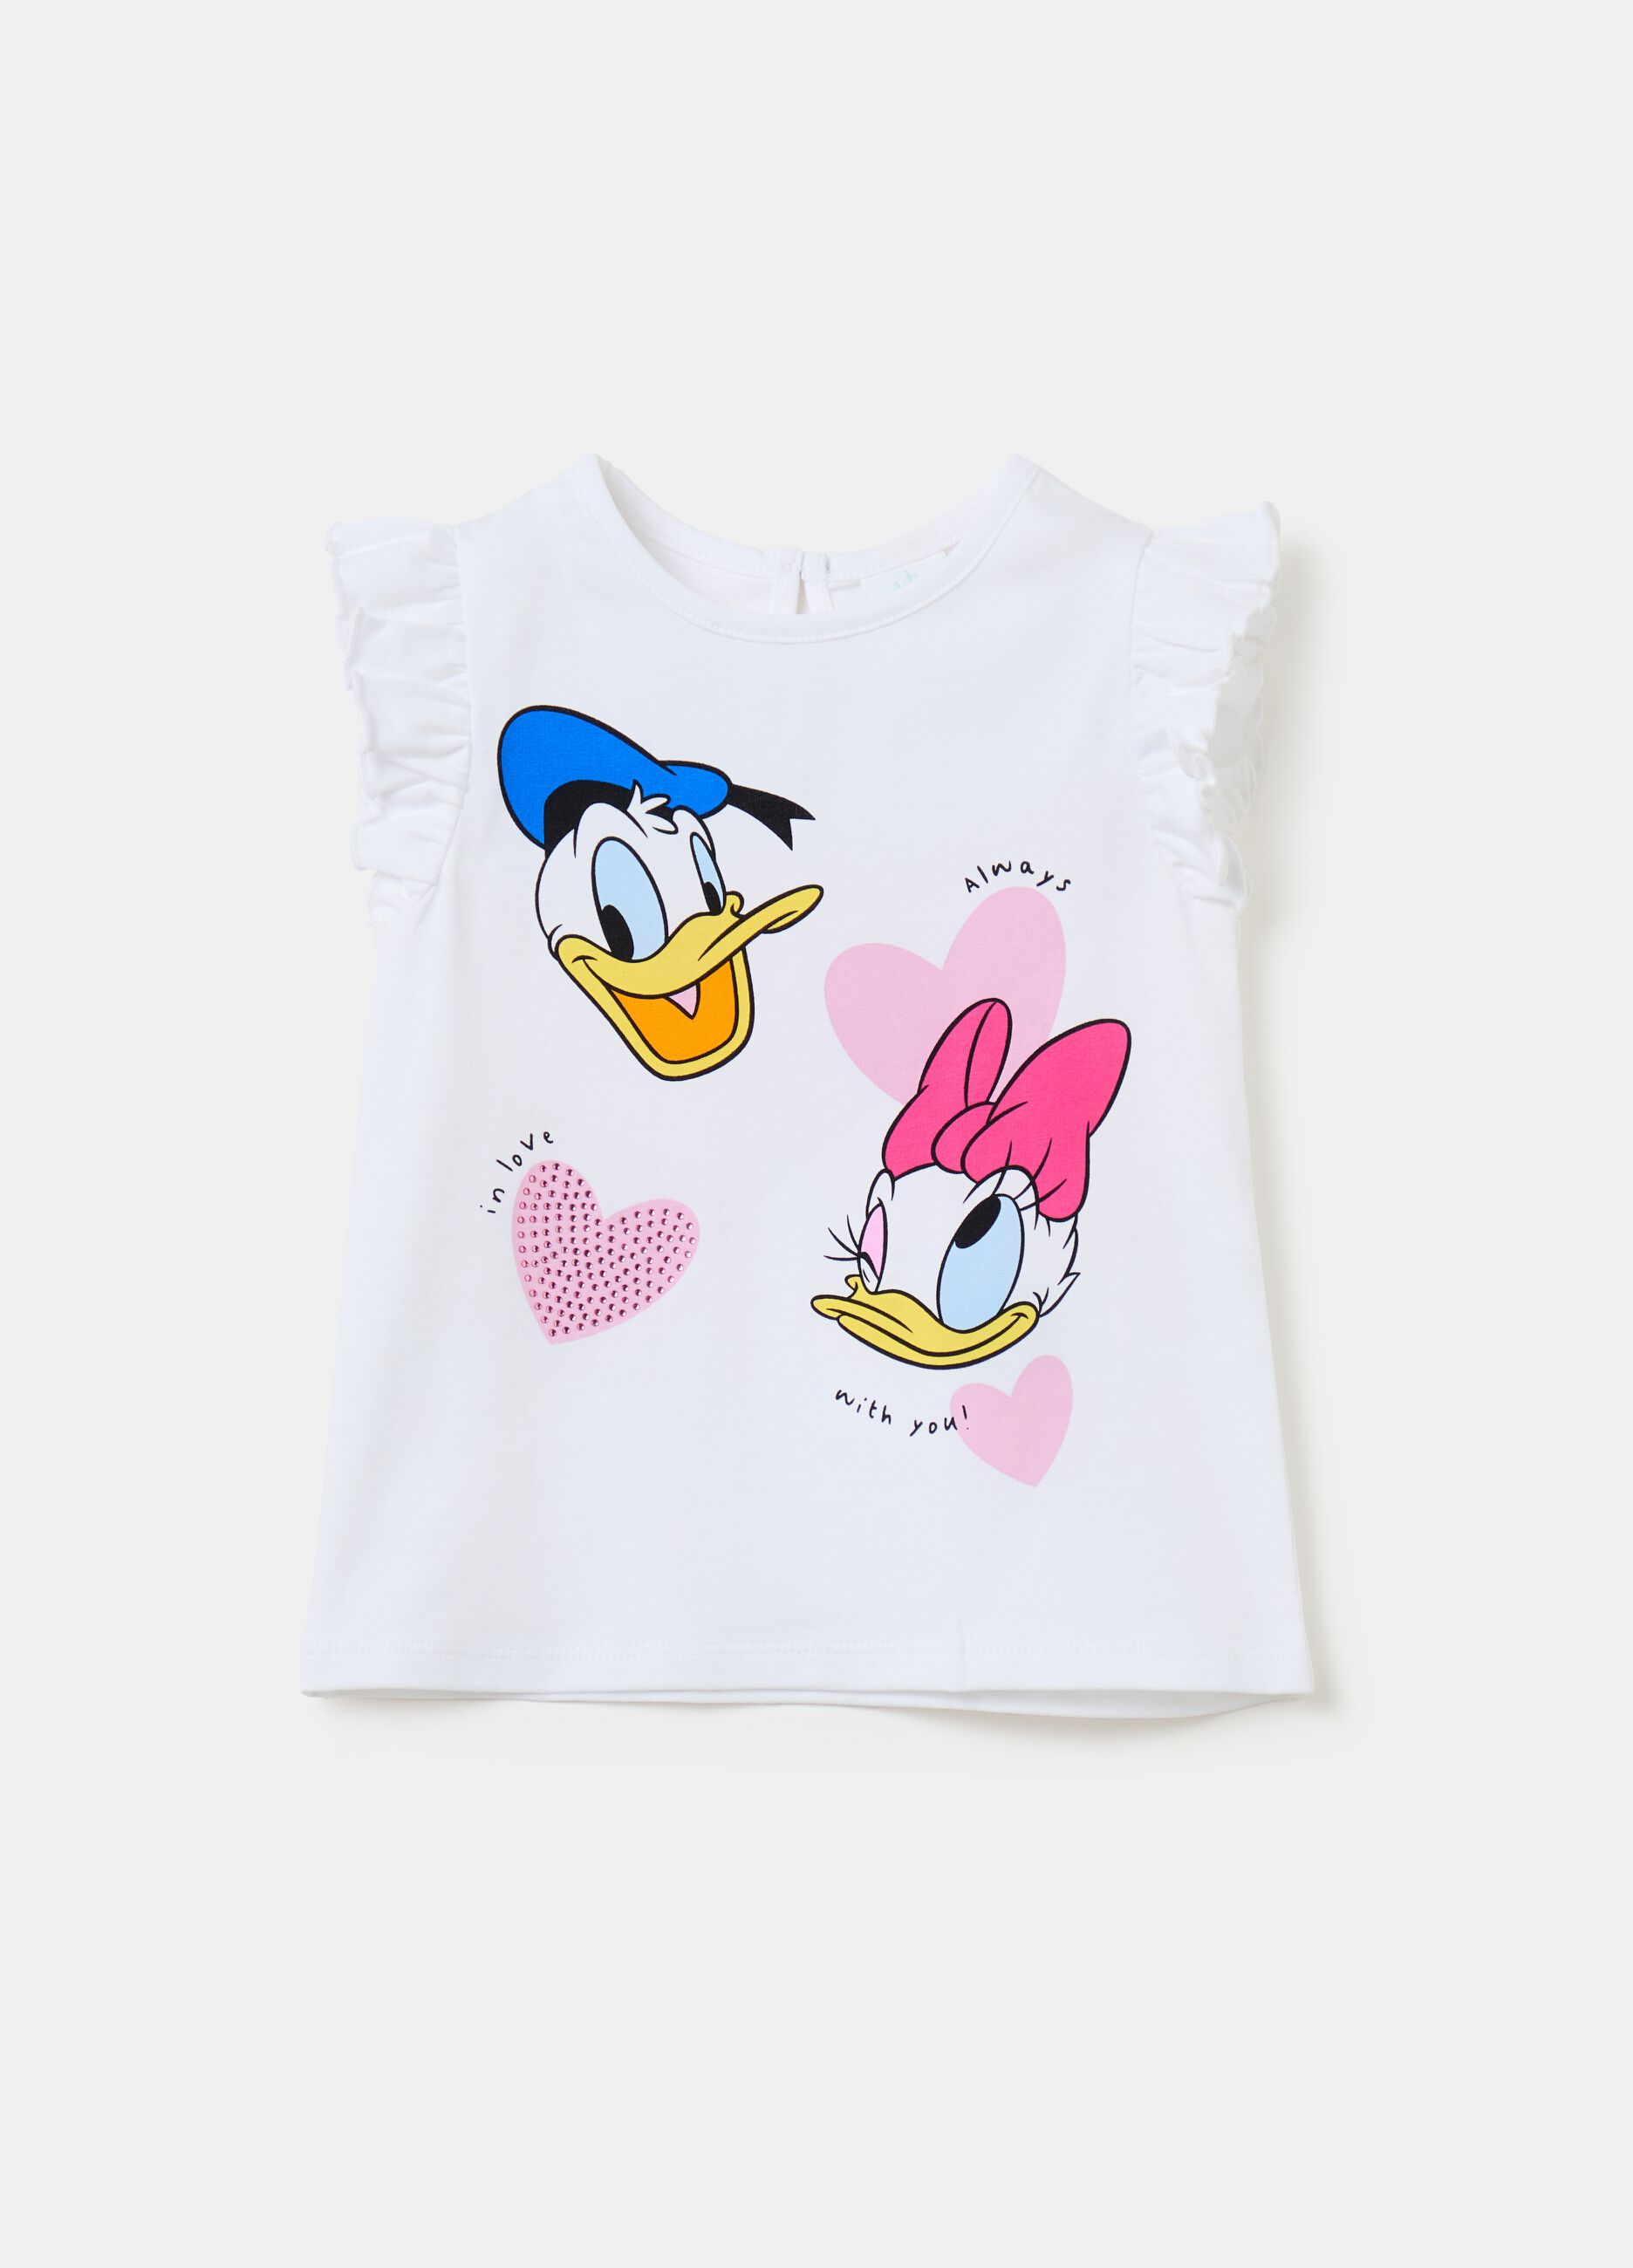 Tank top with Donald Duck 90 print